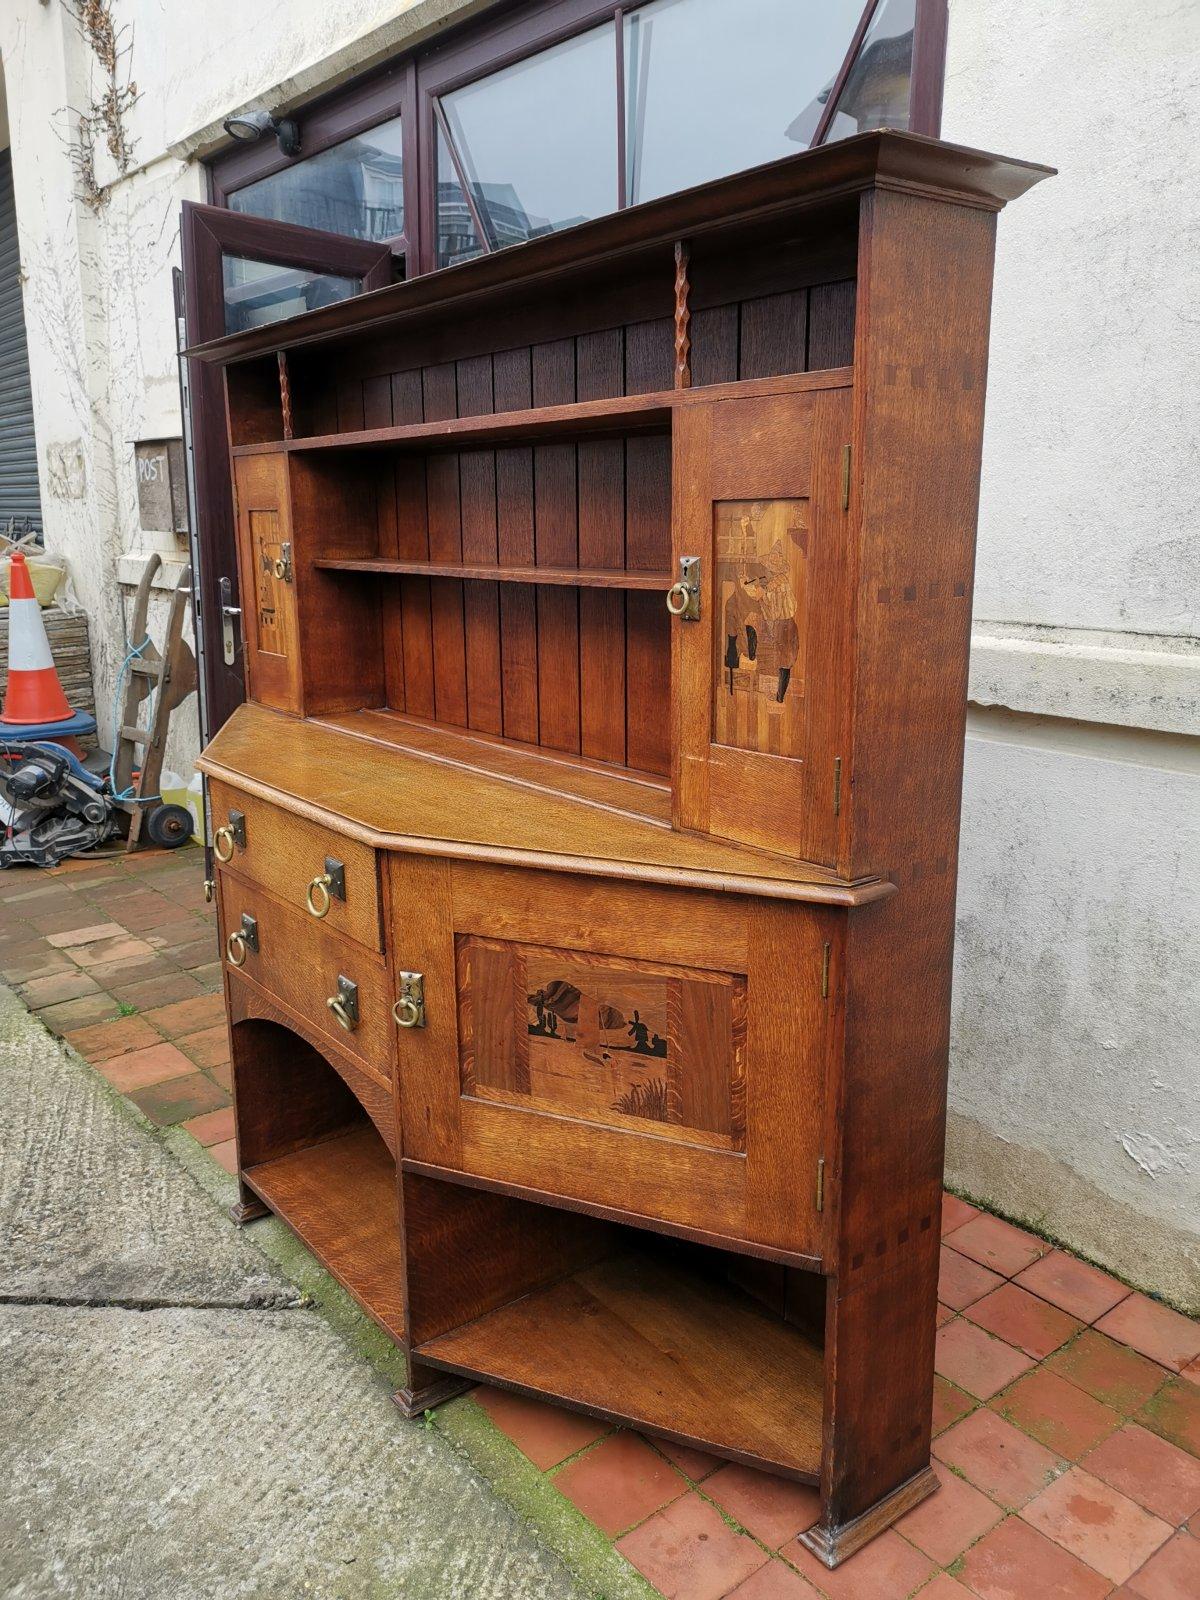 Bath cabinet makers. In the Liberty style.
An early Arts & Crafts oak break front sideboard with Dutch inlaid scenes of mill owners with there little black cat in the two upper cupboard doors, to the lower cupboards on his horse and a sailing